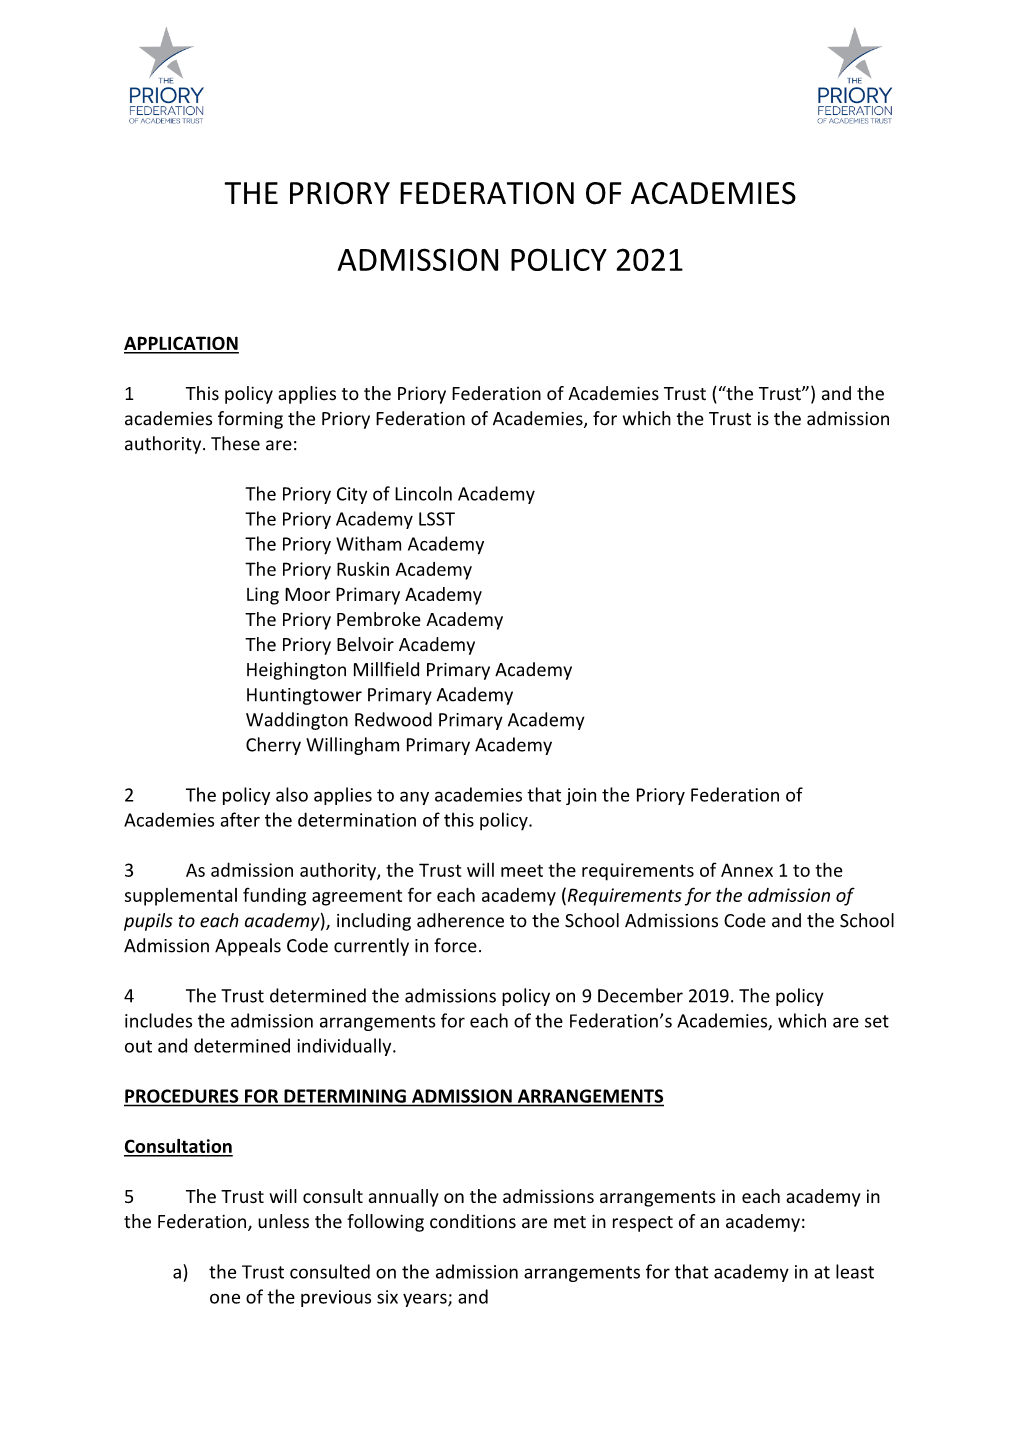 The Priory Federation of Academies Admission Policy